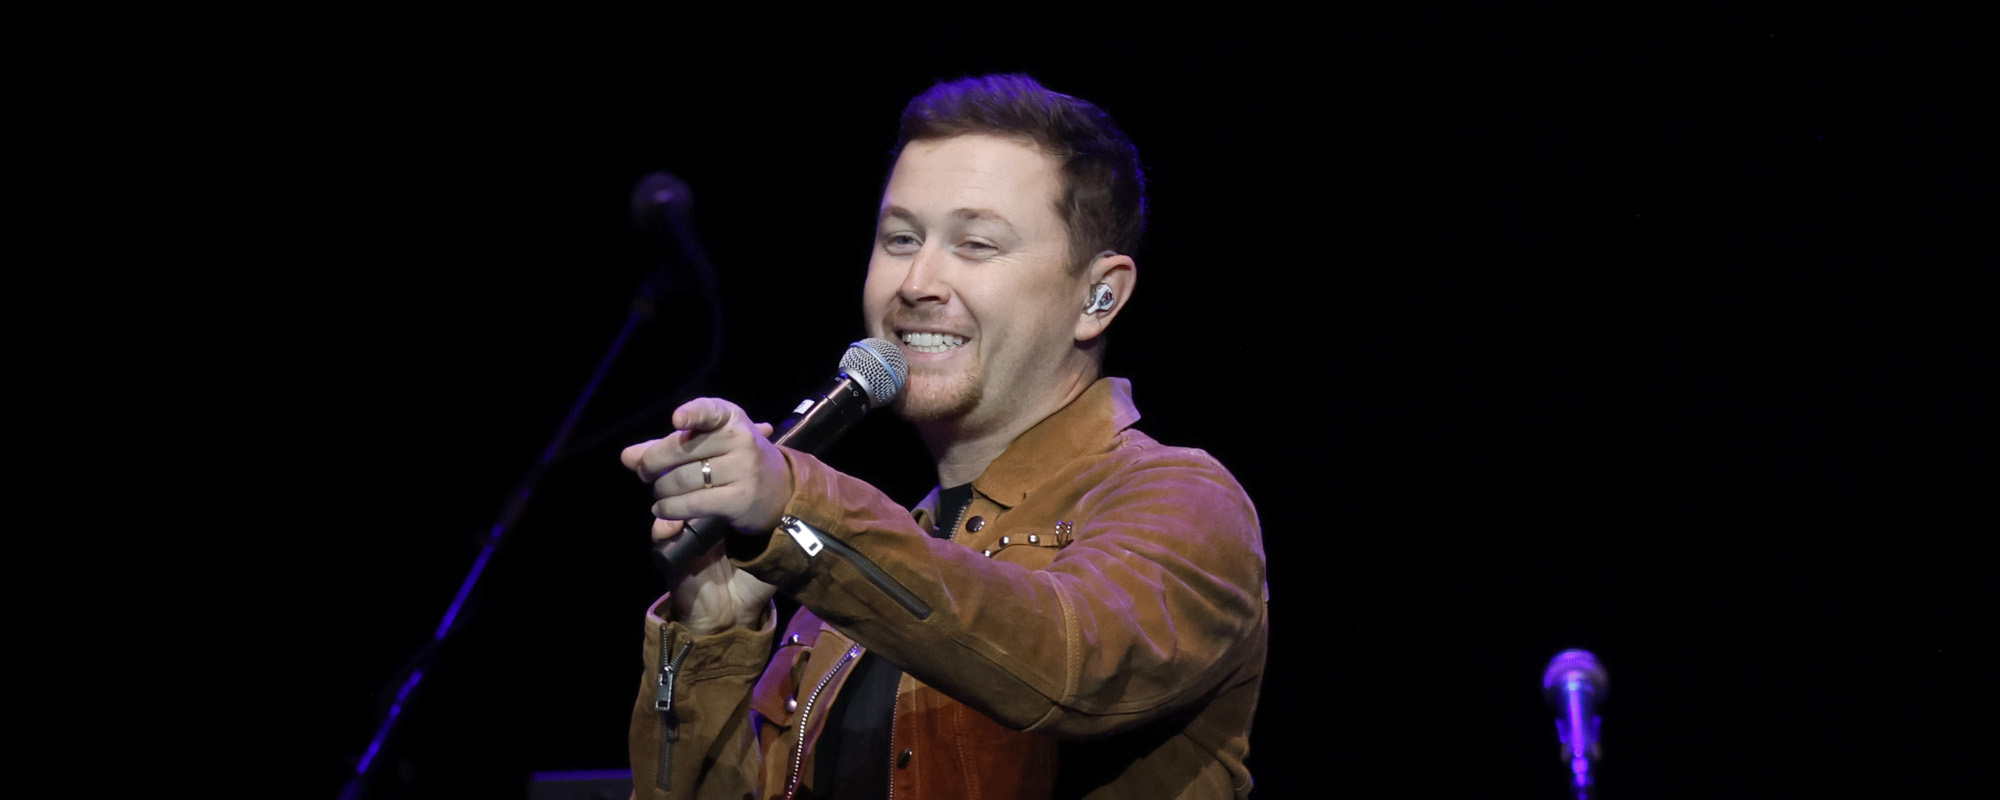 A Gut Punch Strait to The Heart: The Meaning Behind “Damn Strait” by Scotty McCreery